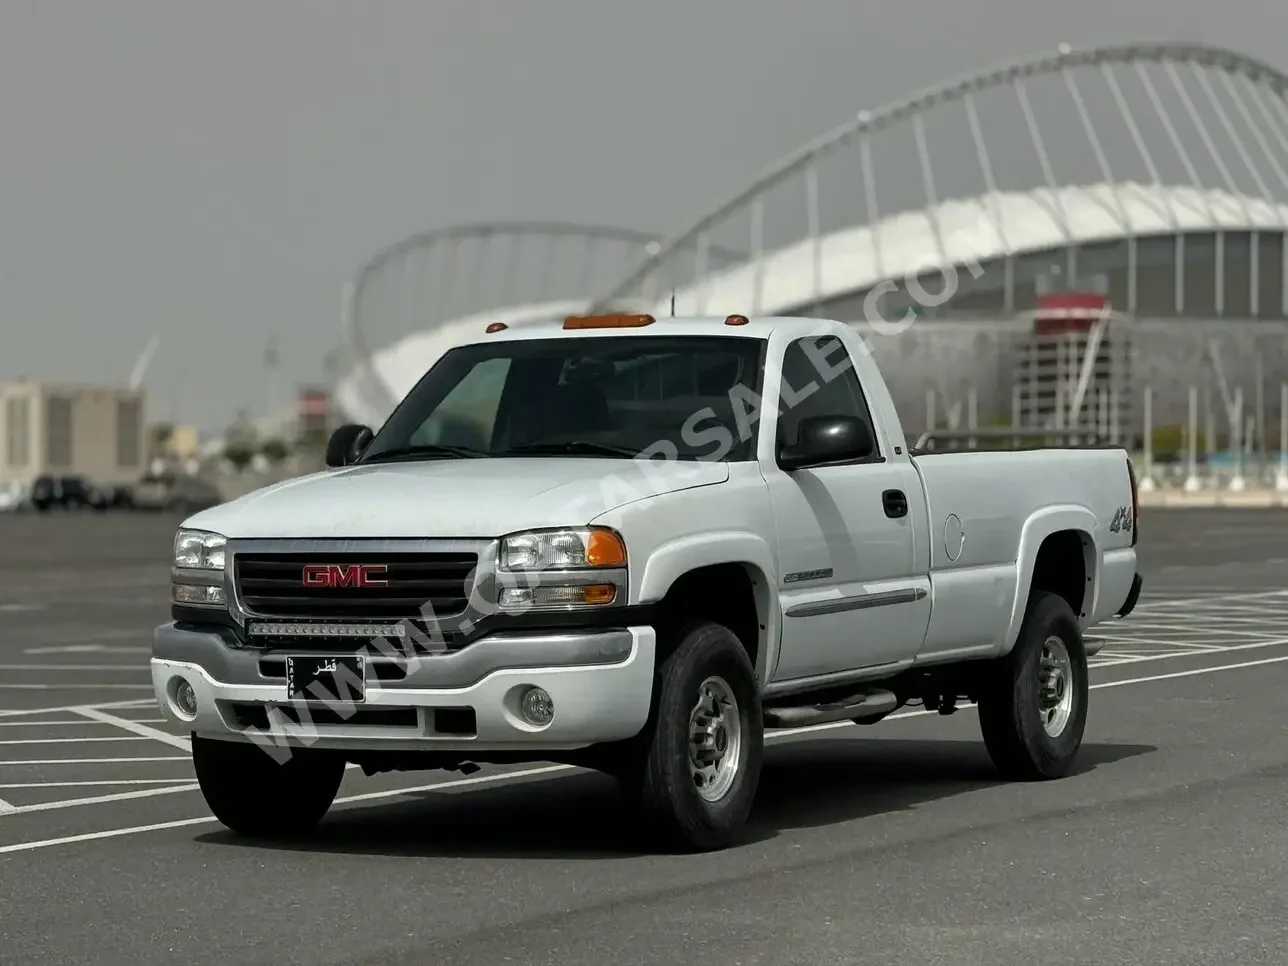 GMC  Sierra  2500 HD  2006  Automatic  359,000 Km  8 Cylinder  Four Wheel Drive (4WD)  Pick Up  White